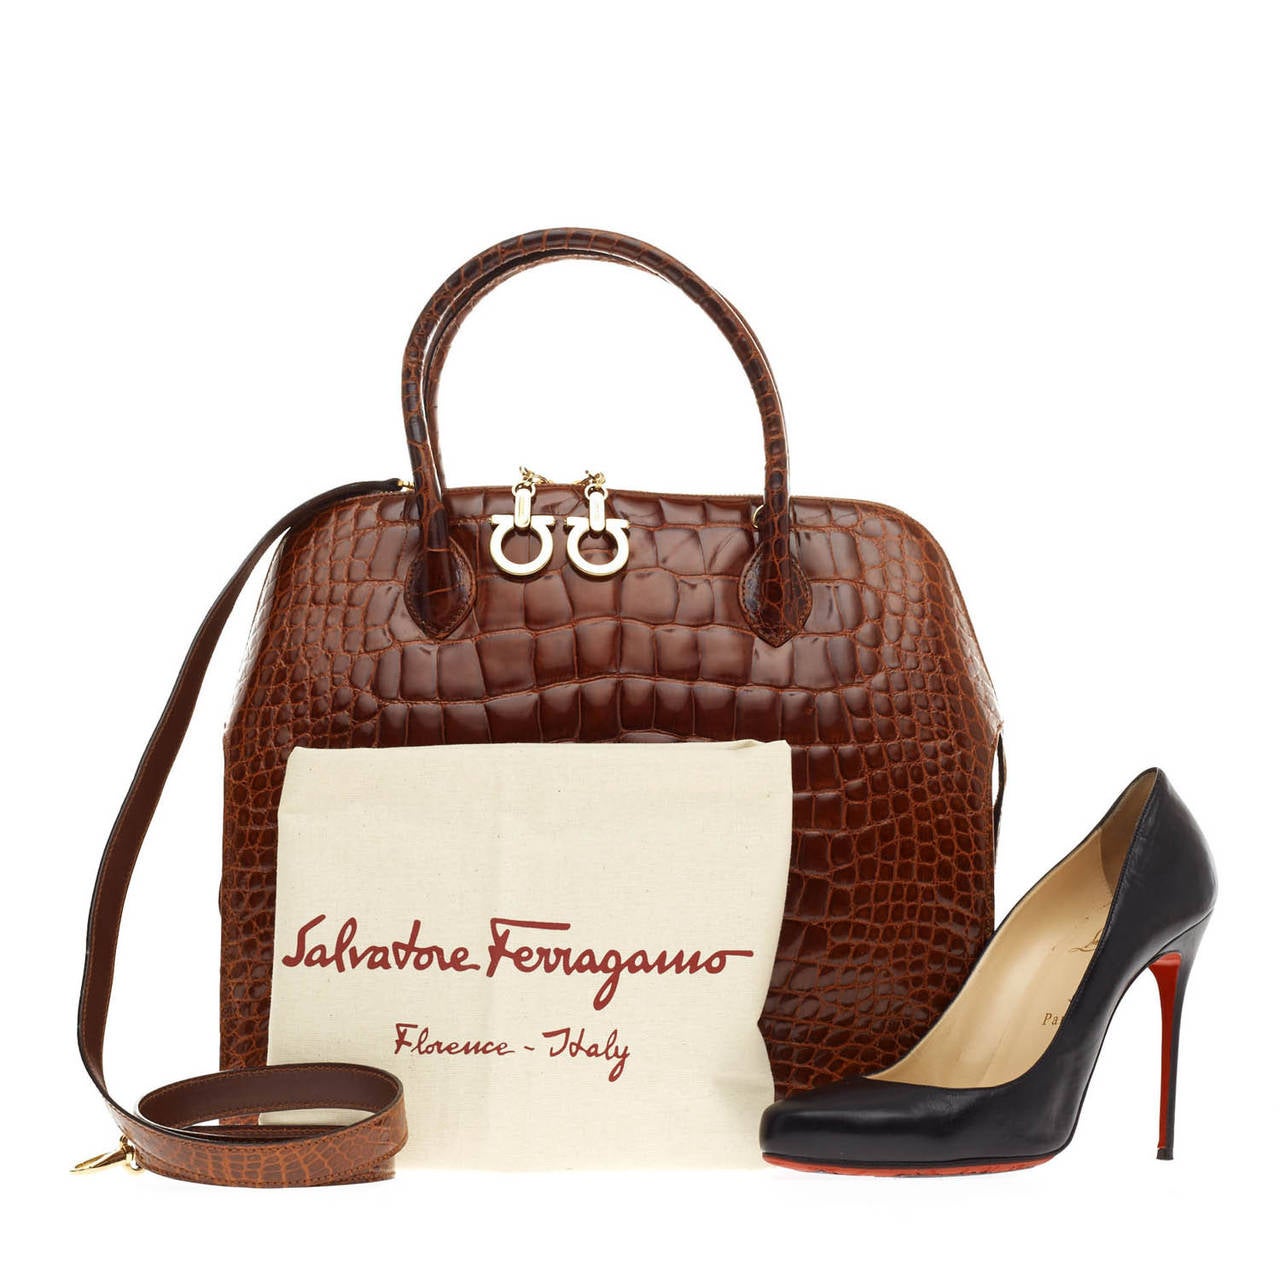 This authentic Salvatore Ferragamo Zip Frame Bag Alligator in Large is a classic and luxurious piece crafted of alligator skin. This sturdy handbag zips around the frame with oversize gold tone Gancini hardware and four protective studs at the base.